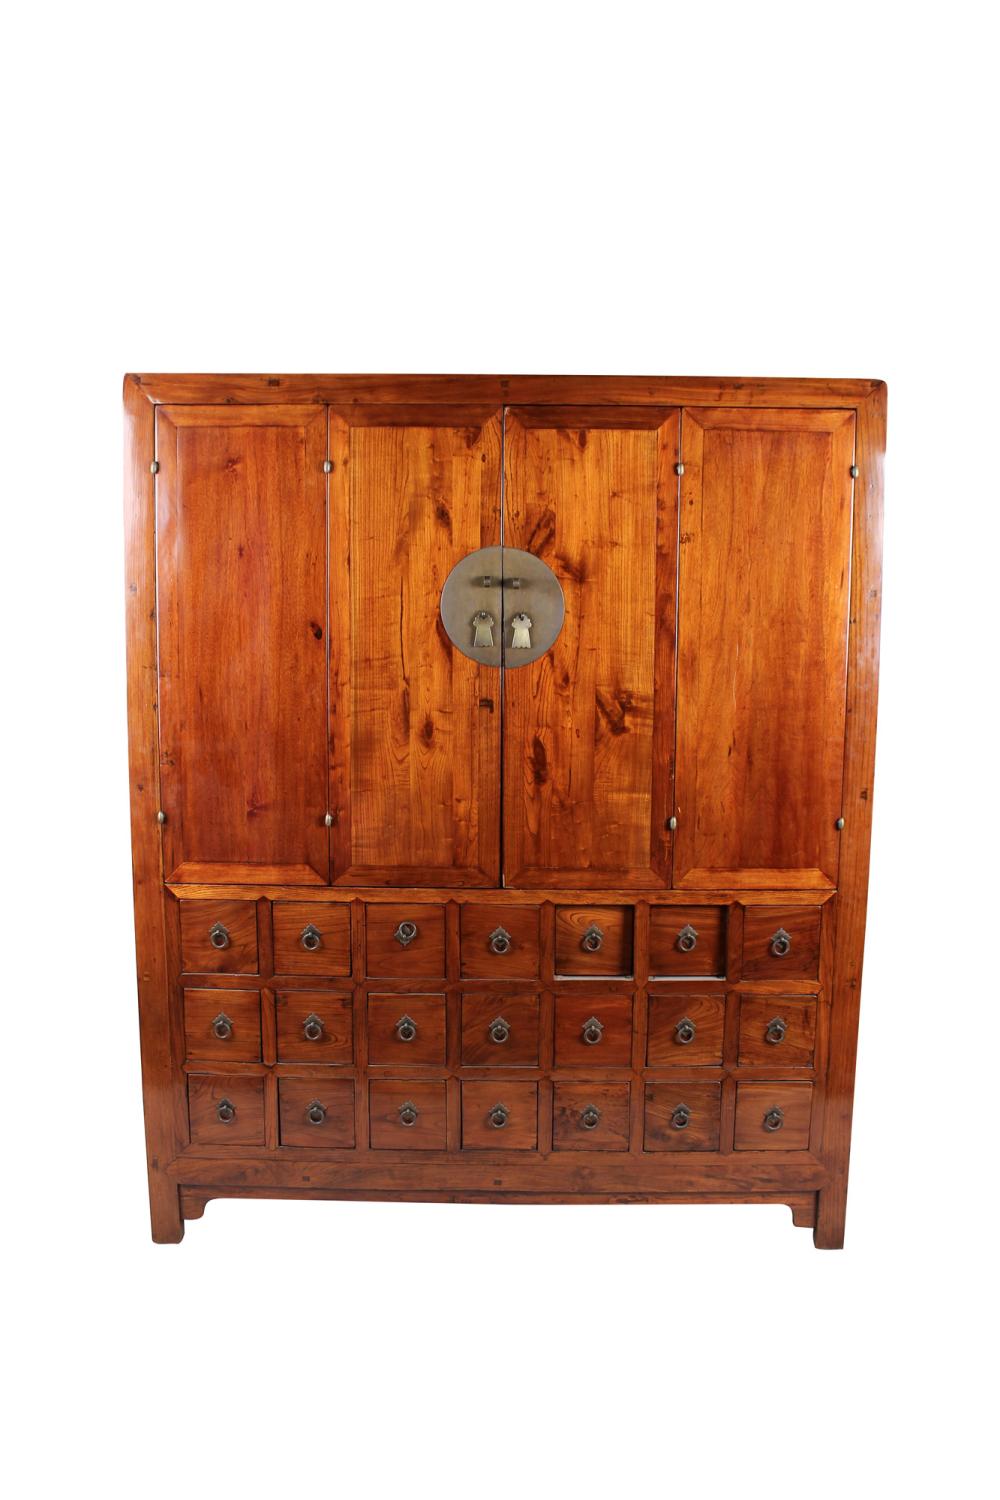 CHINESE HARDWOOD APOTHECARY CABINETwith